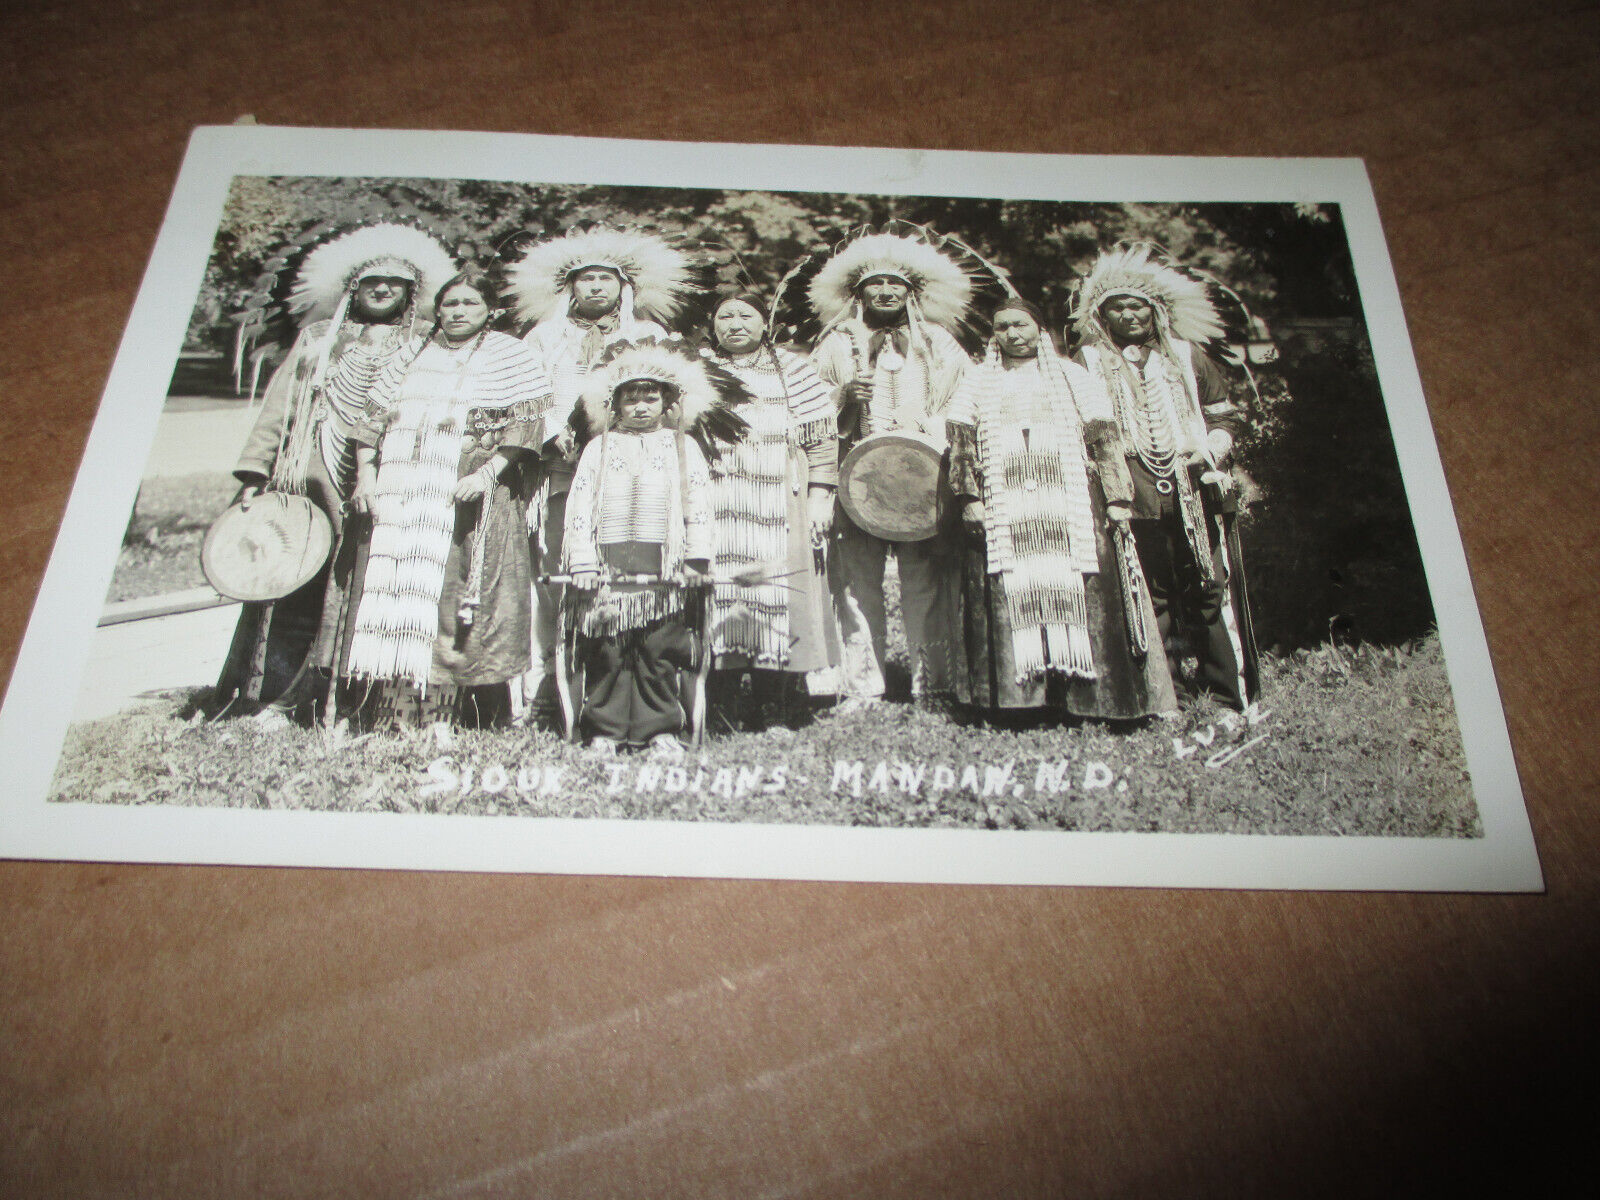 MANDAN ND - 1930's ERA REAL-PHOTO POSTCARD - SIOUX INDIANS - PHOTO by LUTZ